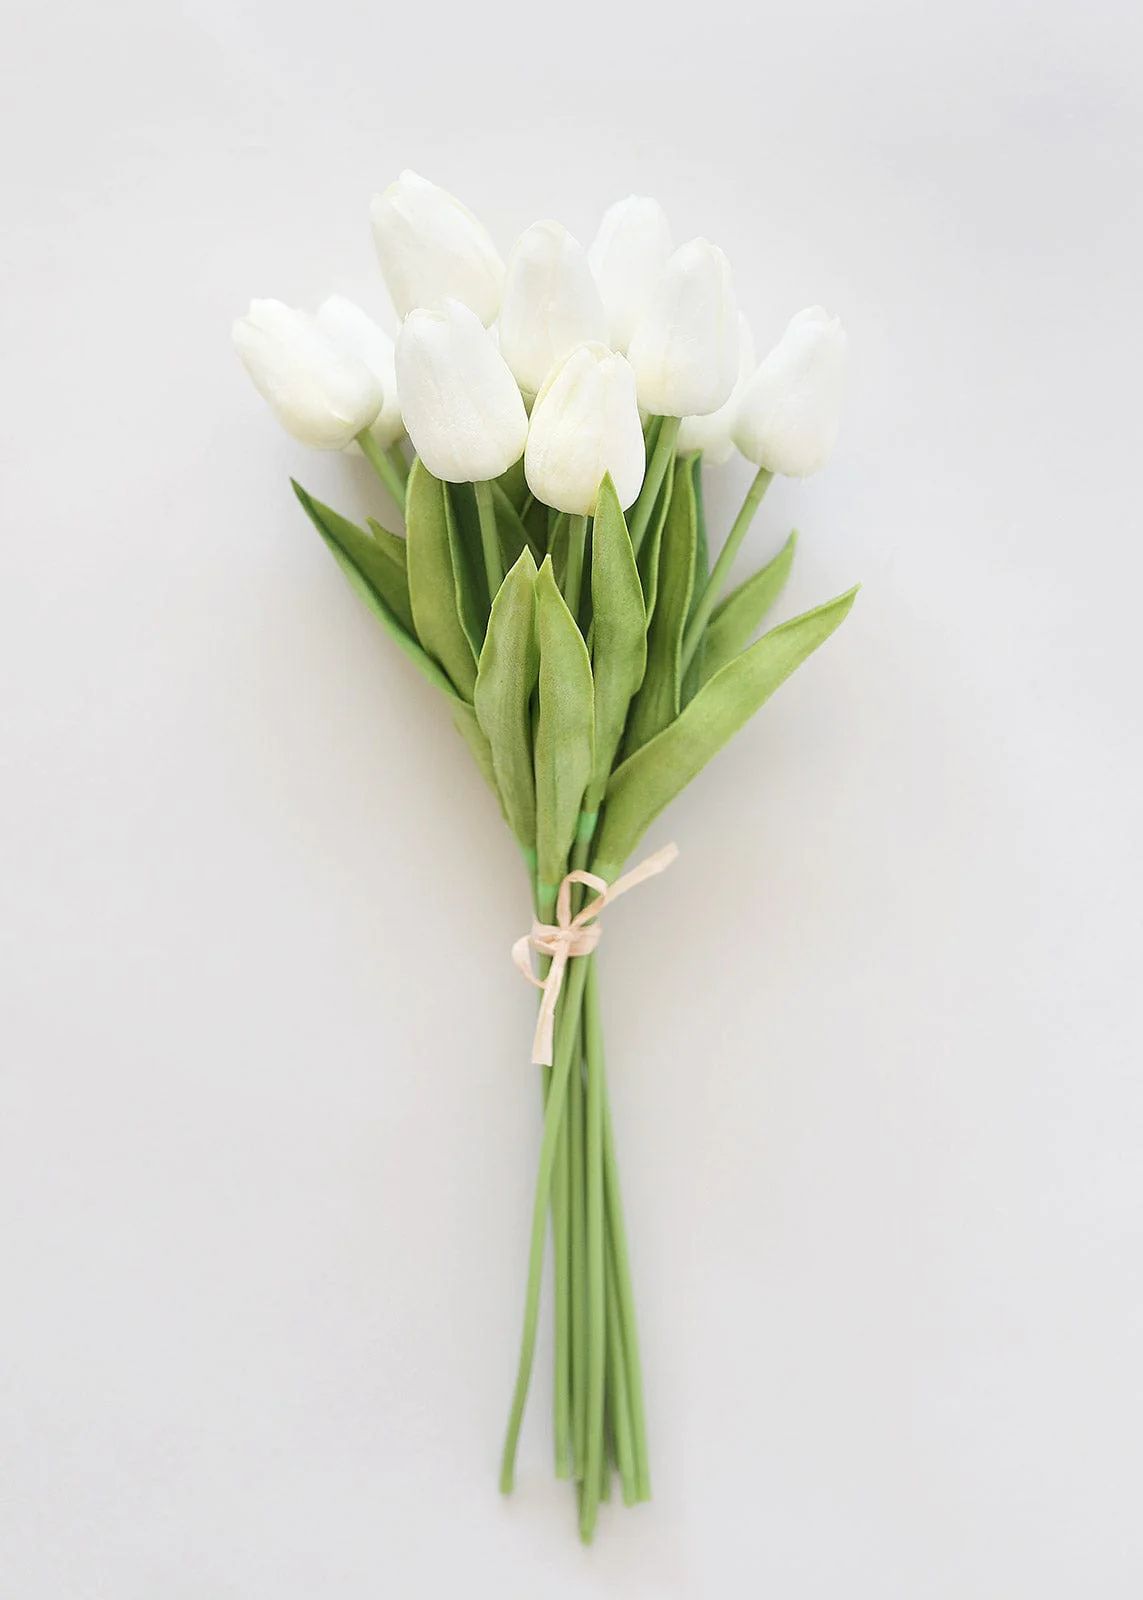 Mini Tulip Bundle in White | Real Touch Flowers Online at Afloral.com | Afloral